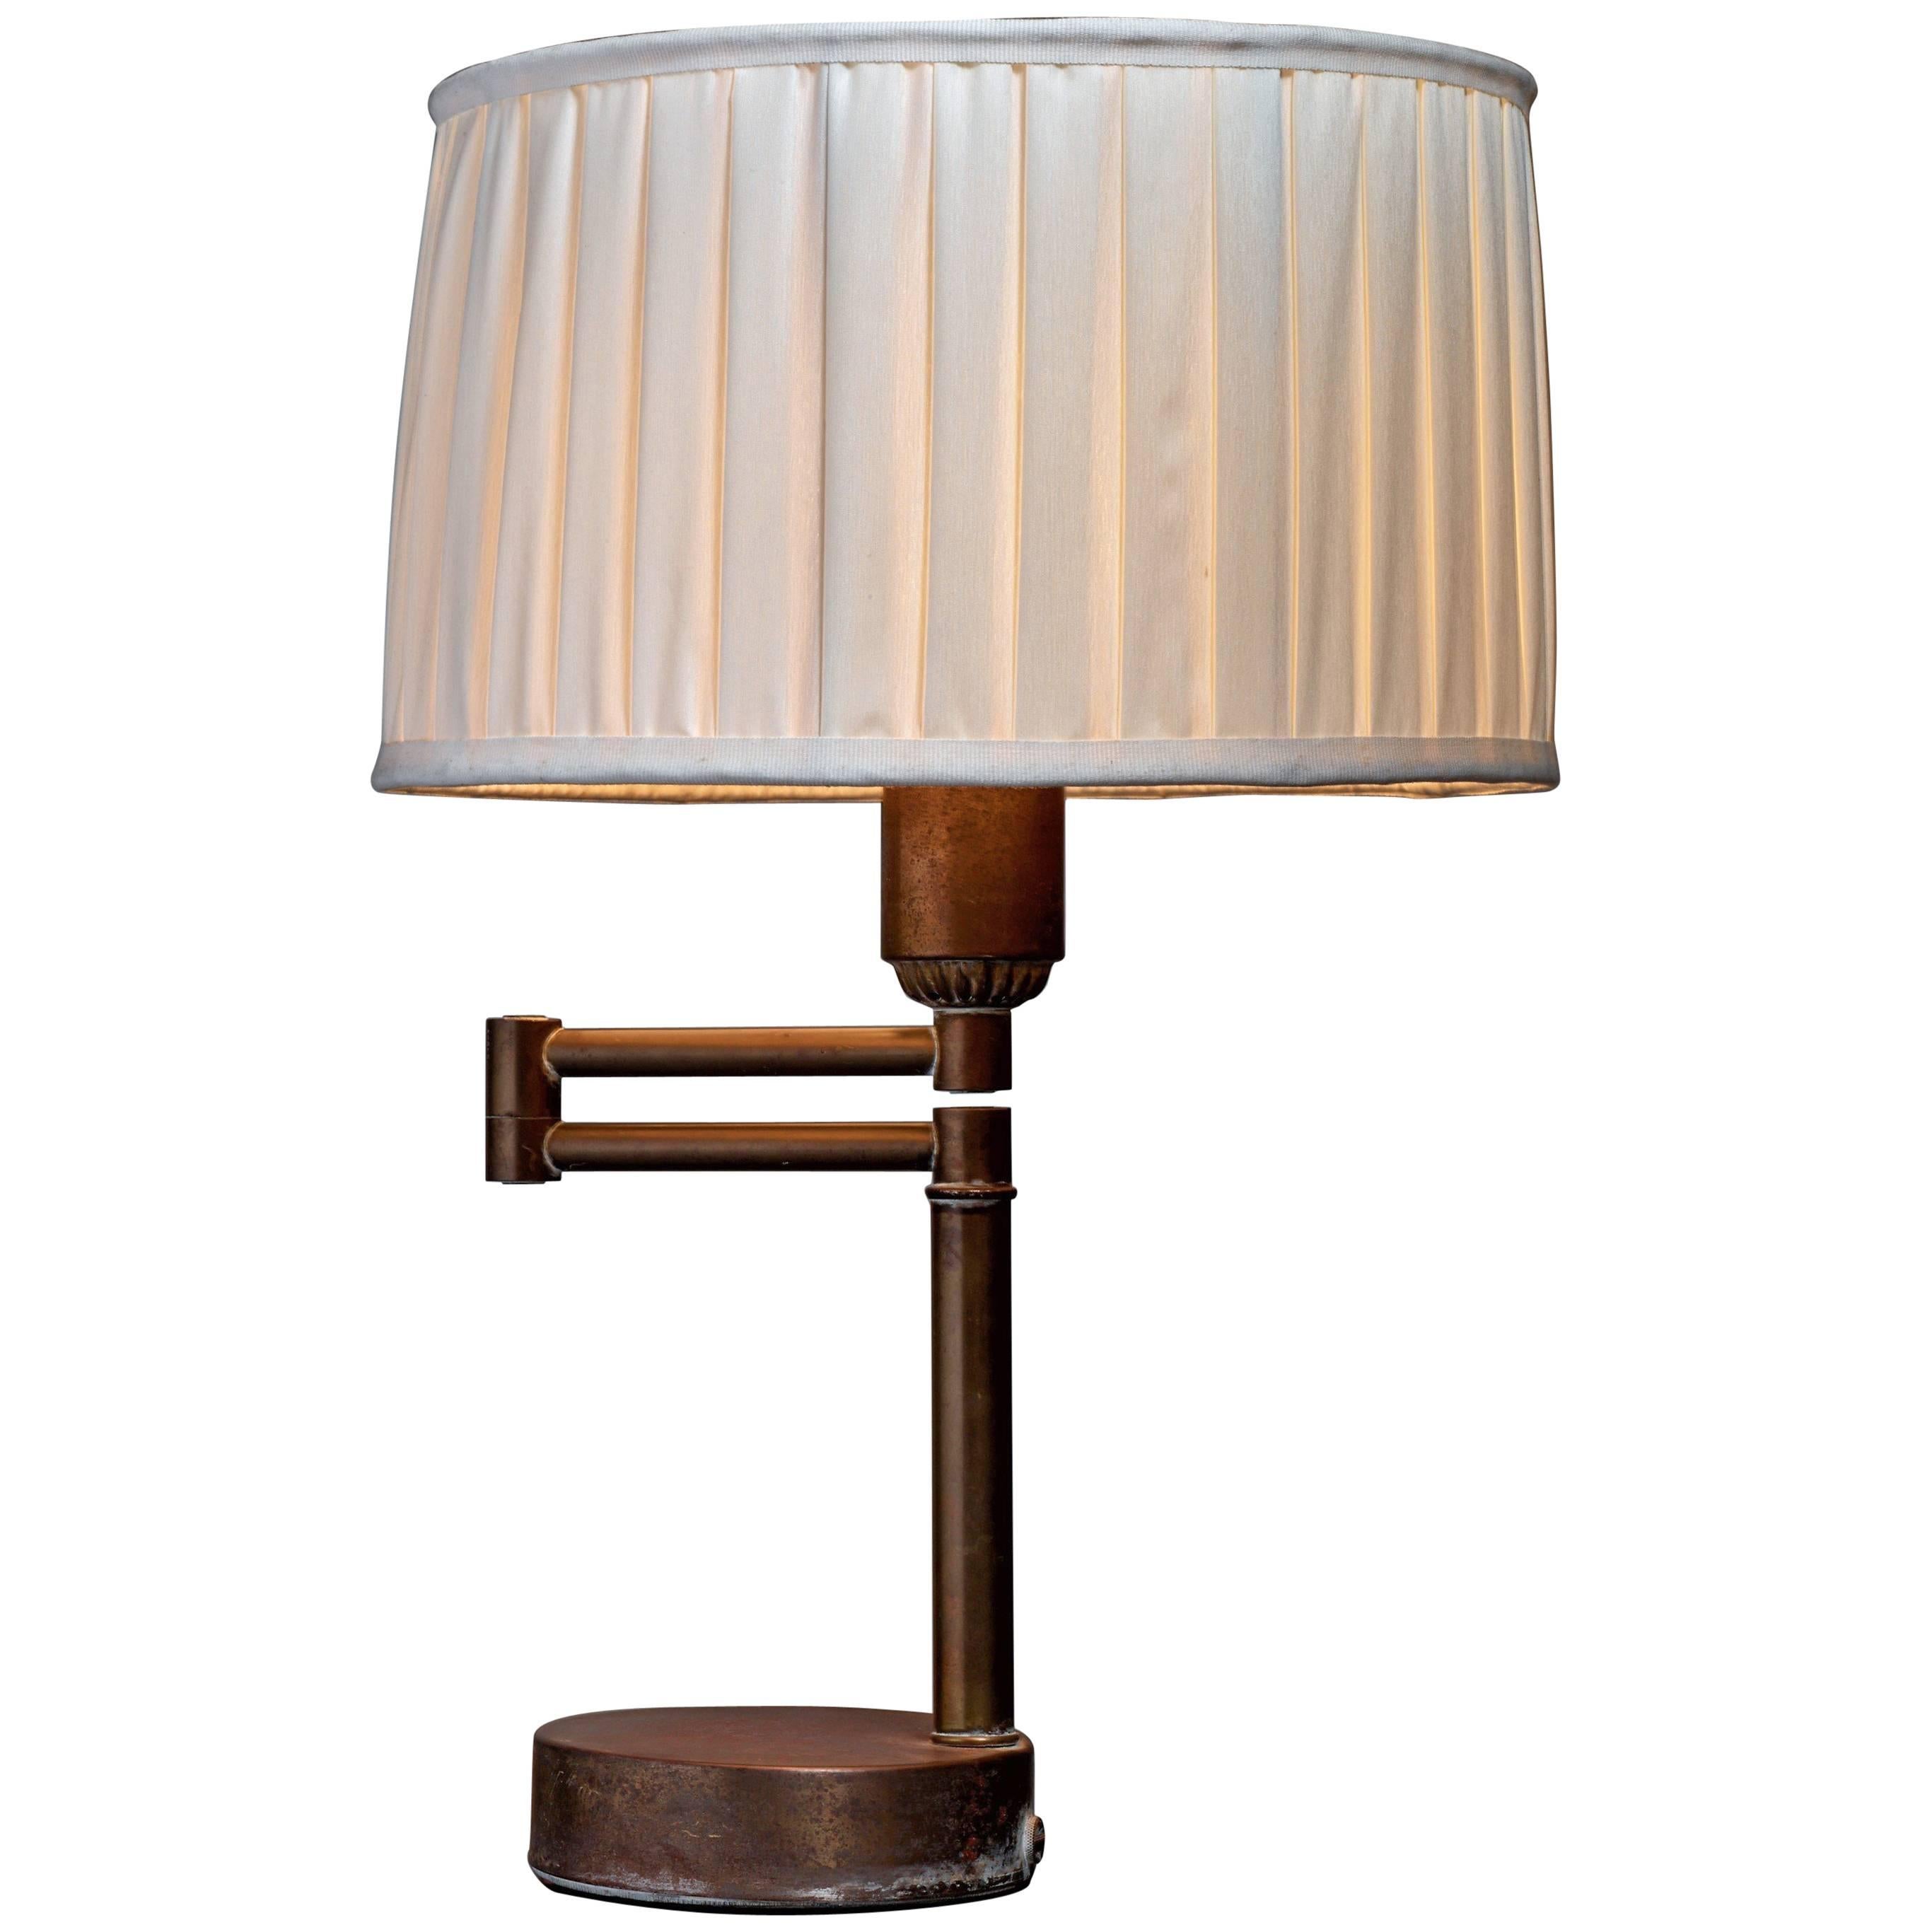 Walter Von Nessen Swing-Arm Table Lamp in Brass, American, 1950s For Sale